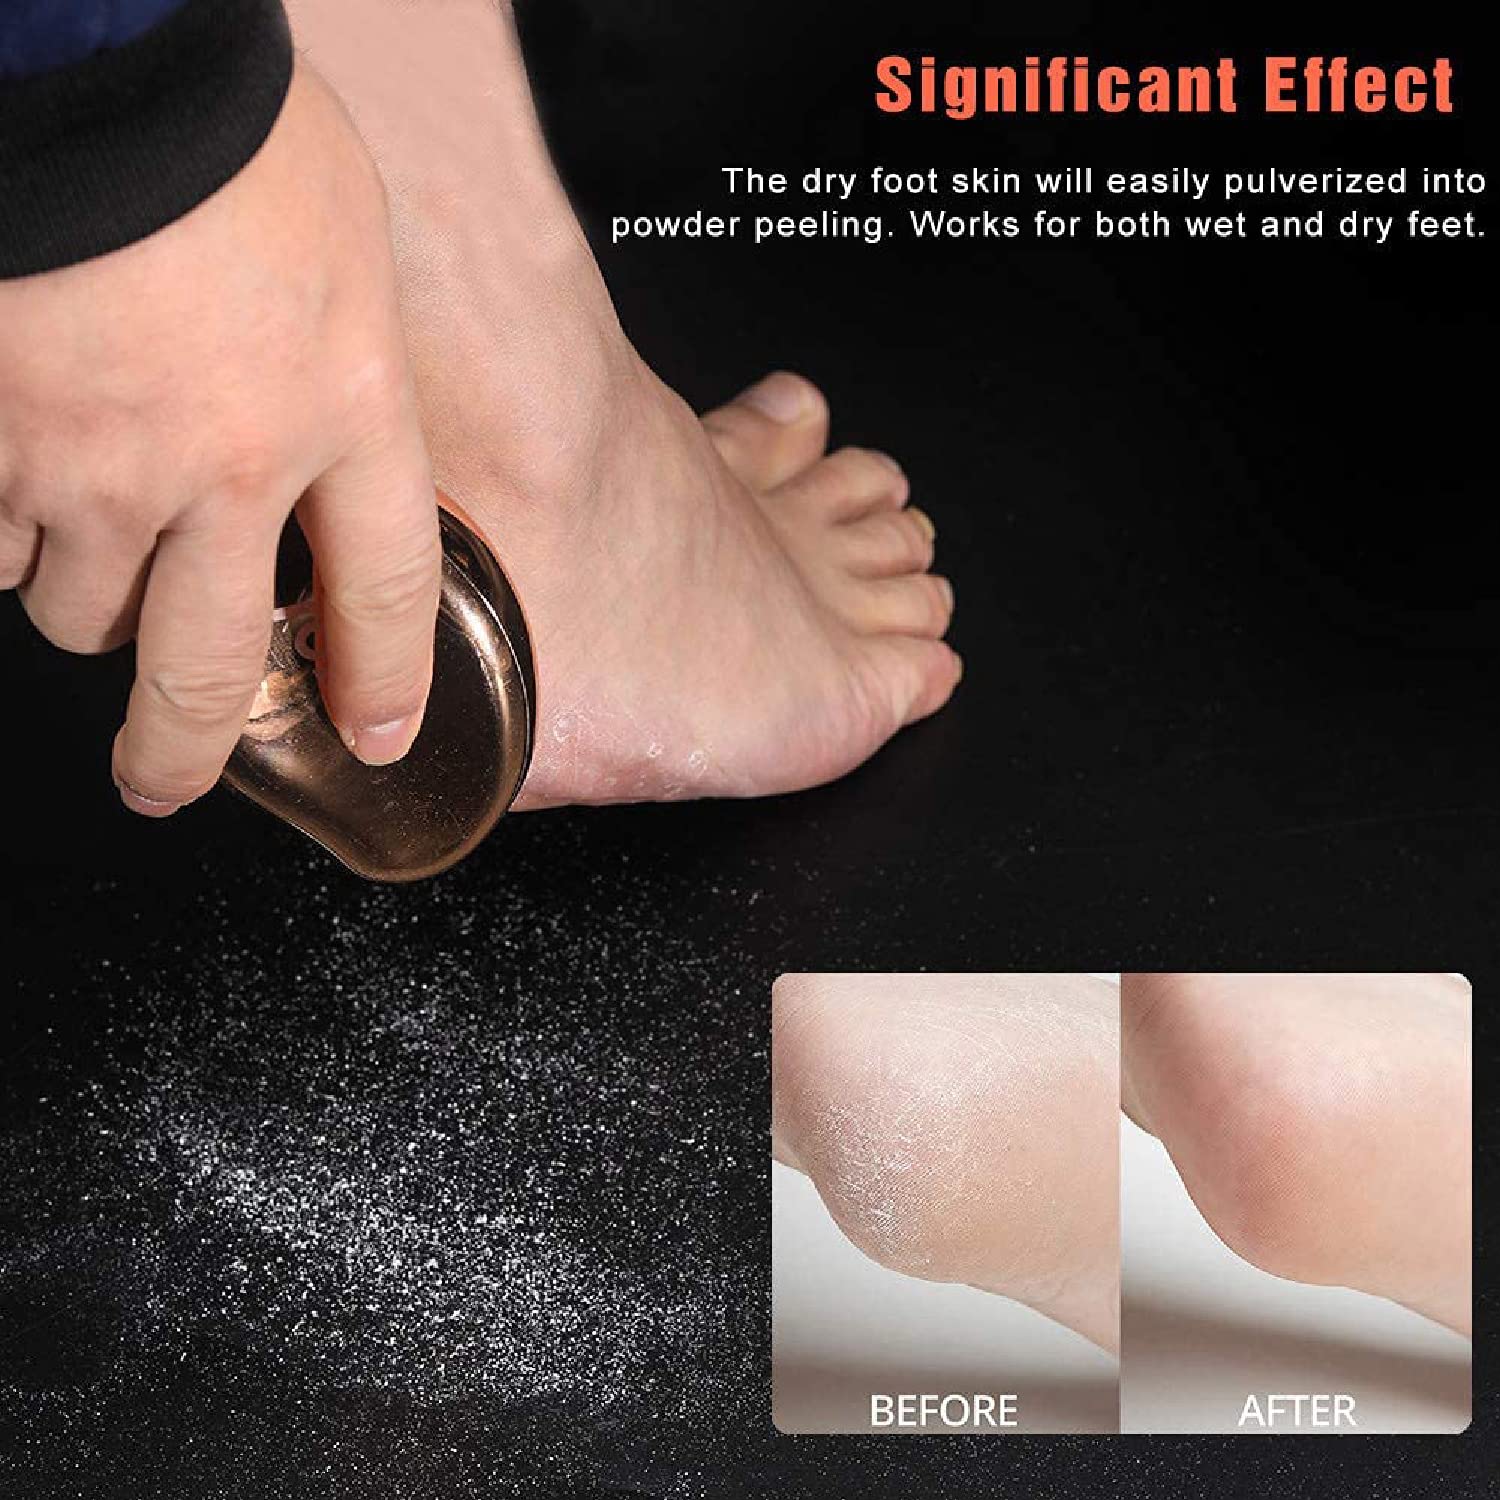 Dr Foot Callus Remover Gel Helps to remove Calluses and Corns also –  Drfootin